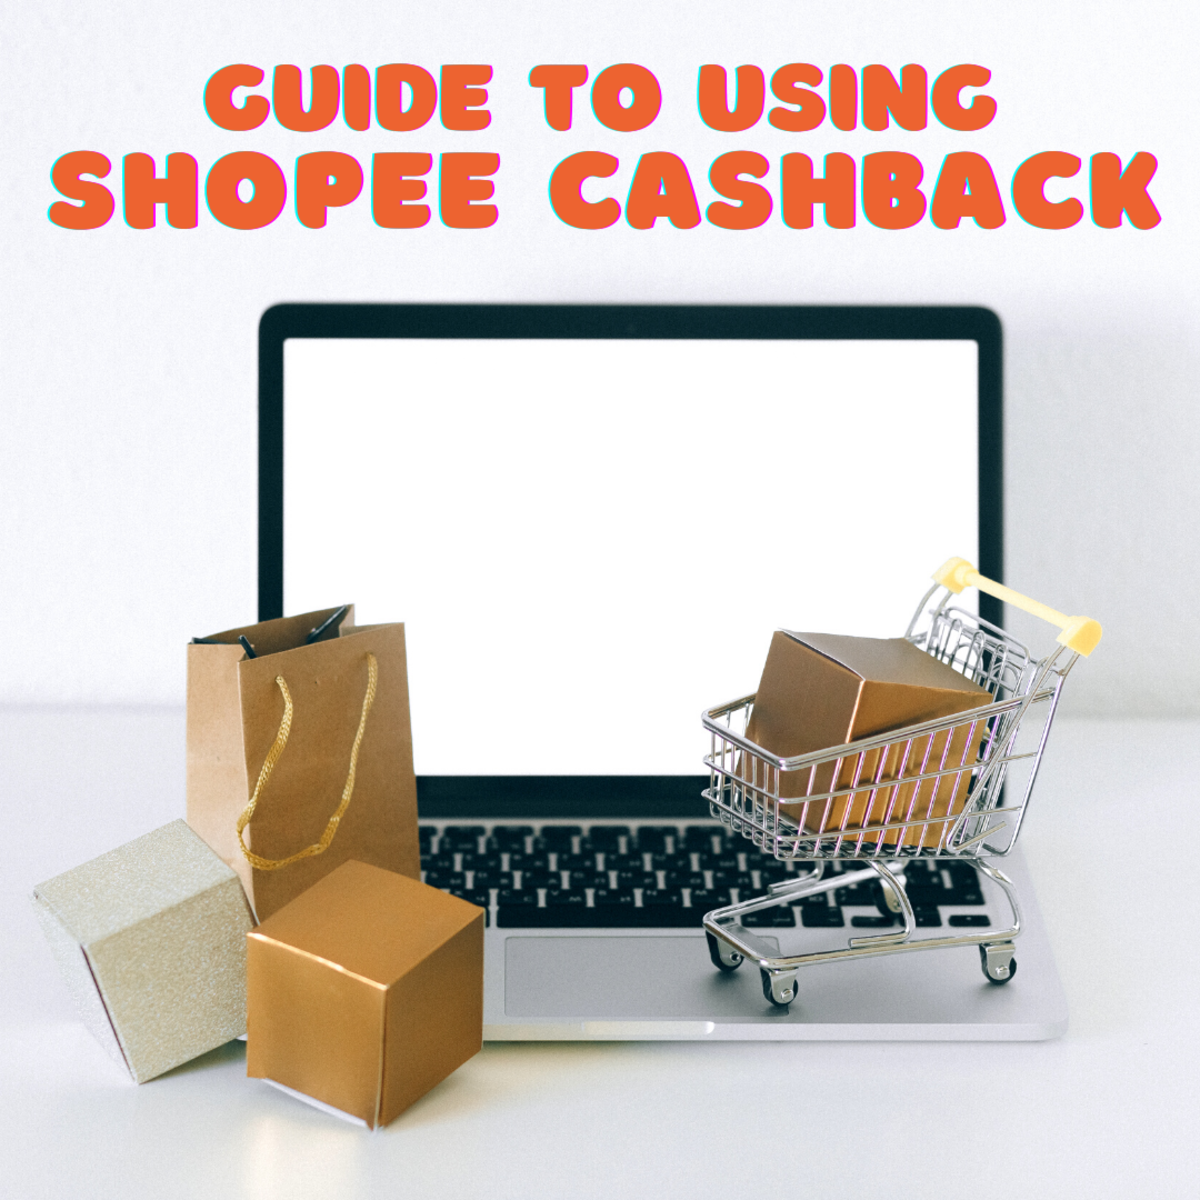 Shopee Cashback: How Does It Work?